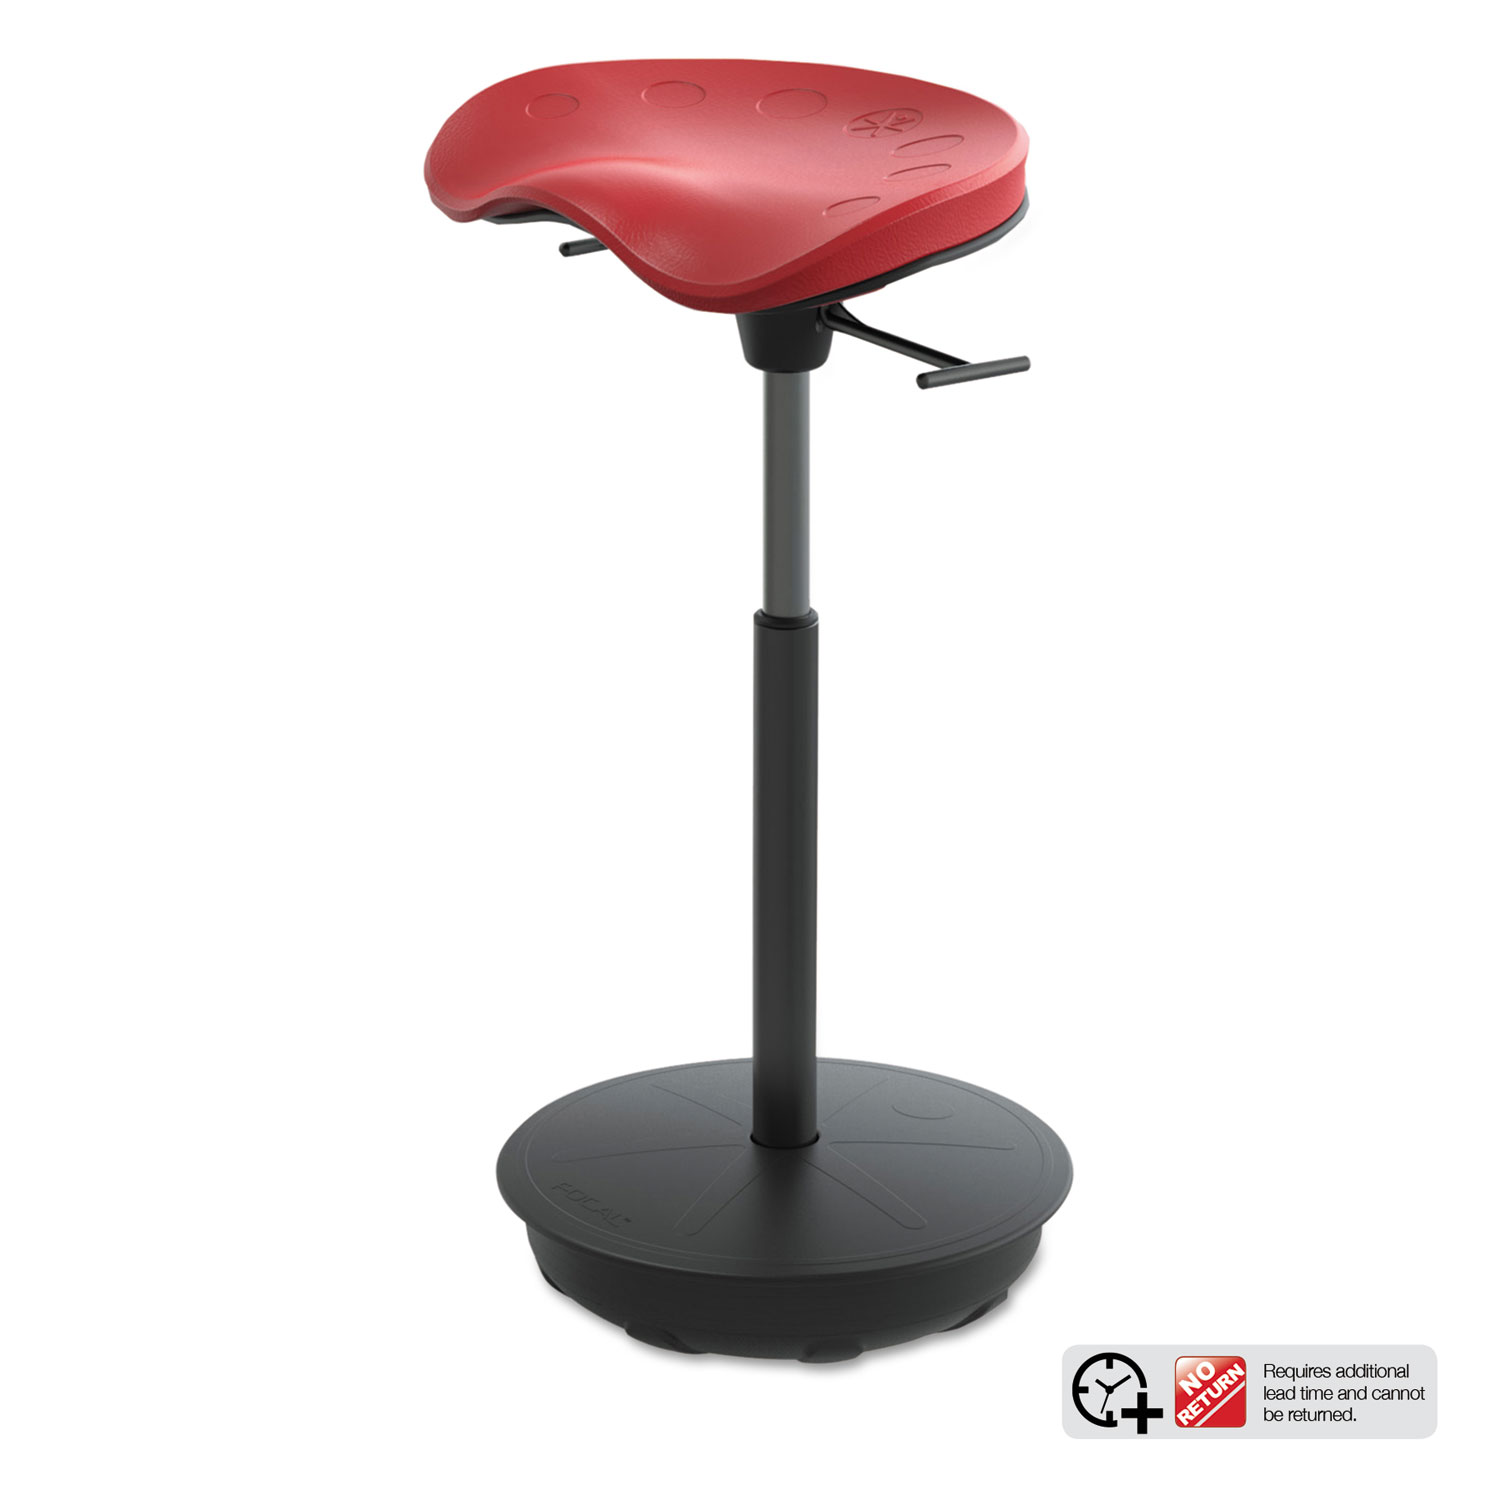  Safco FWS-1000-RD Pivot Seat by Focal Upright, Red Seat, Red Back, Black Base (SAFFWS1000RD) 